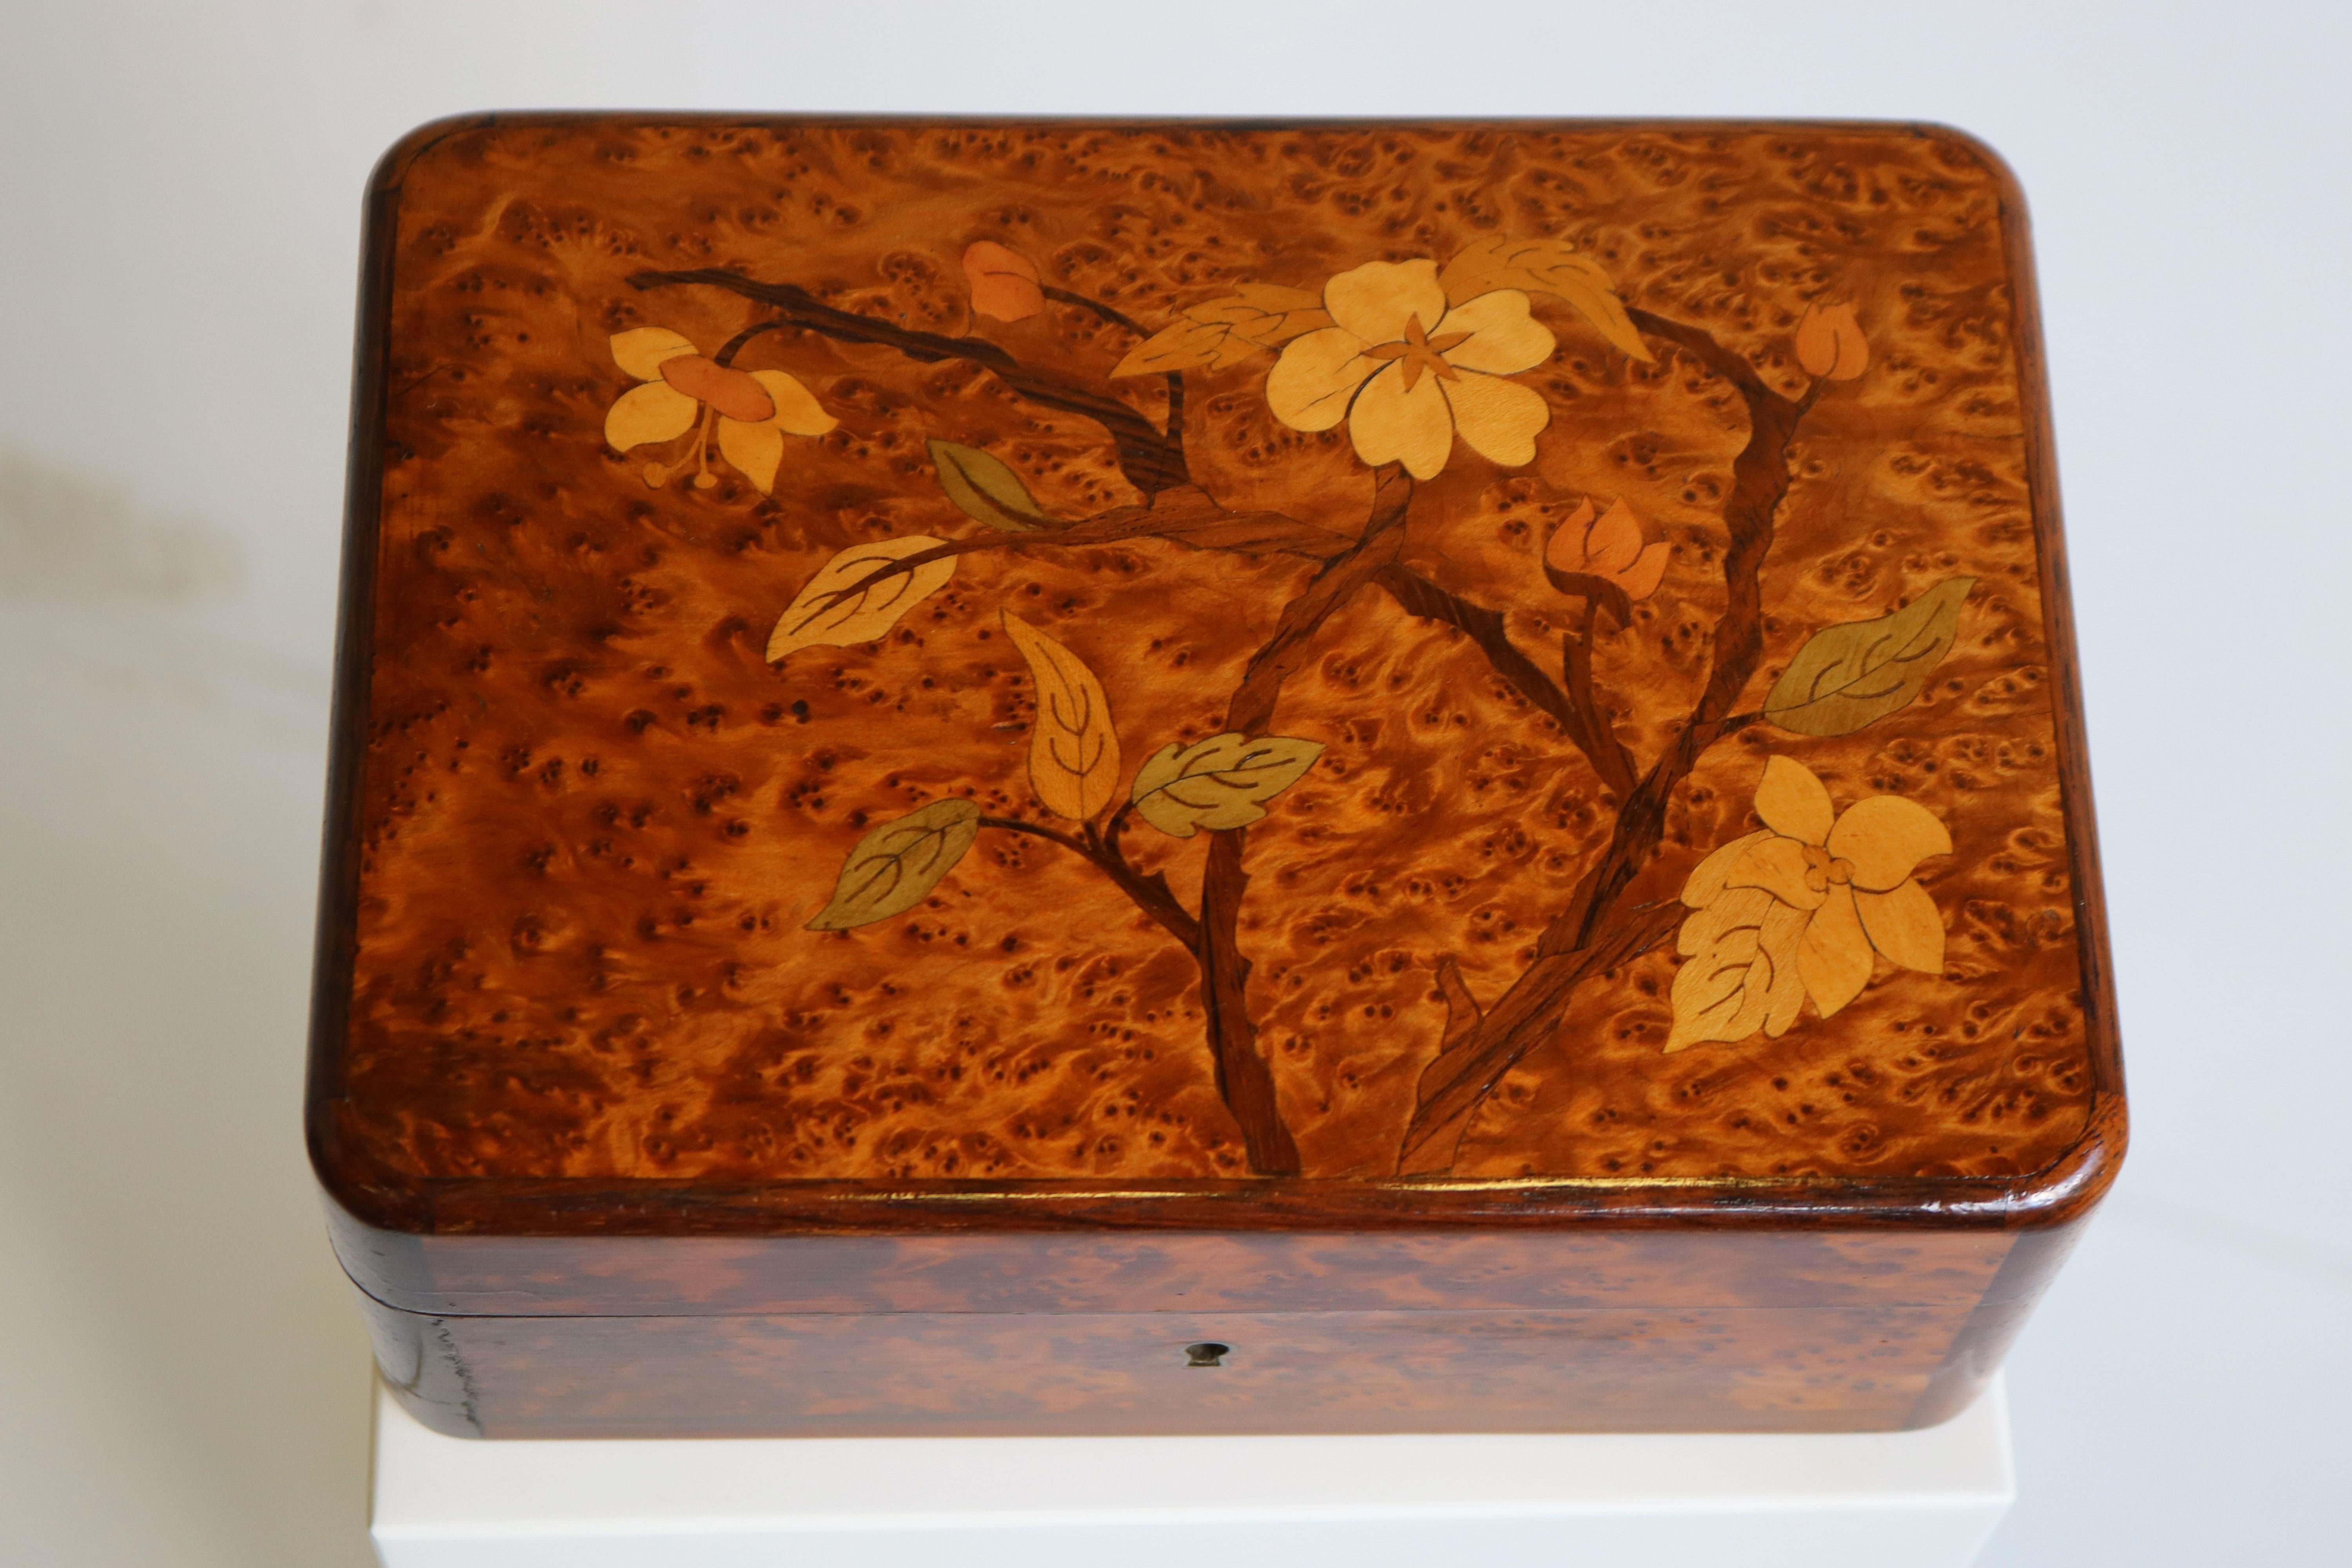 Antique French Art Nouveau / Jugendstil Jewelry Box in Burl Wood & Floral Inlay 5